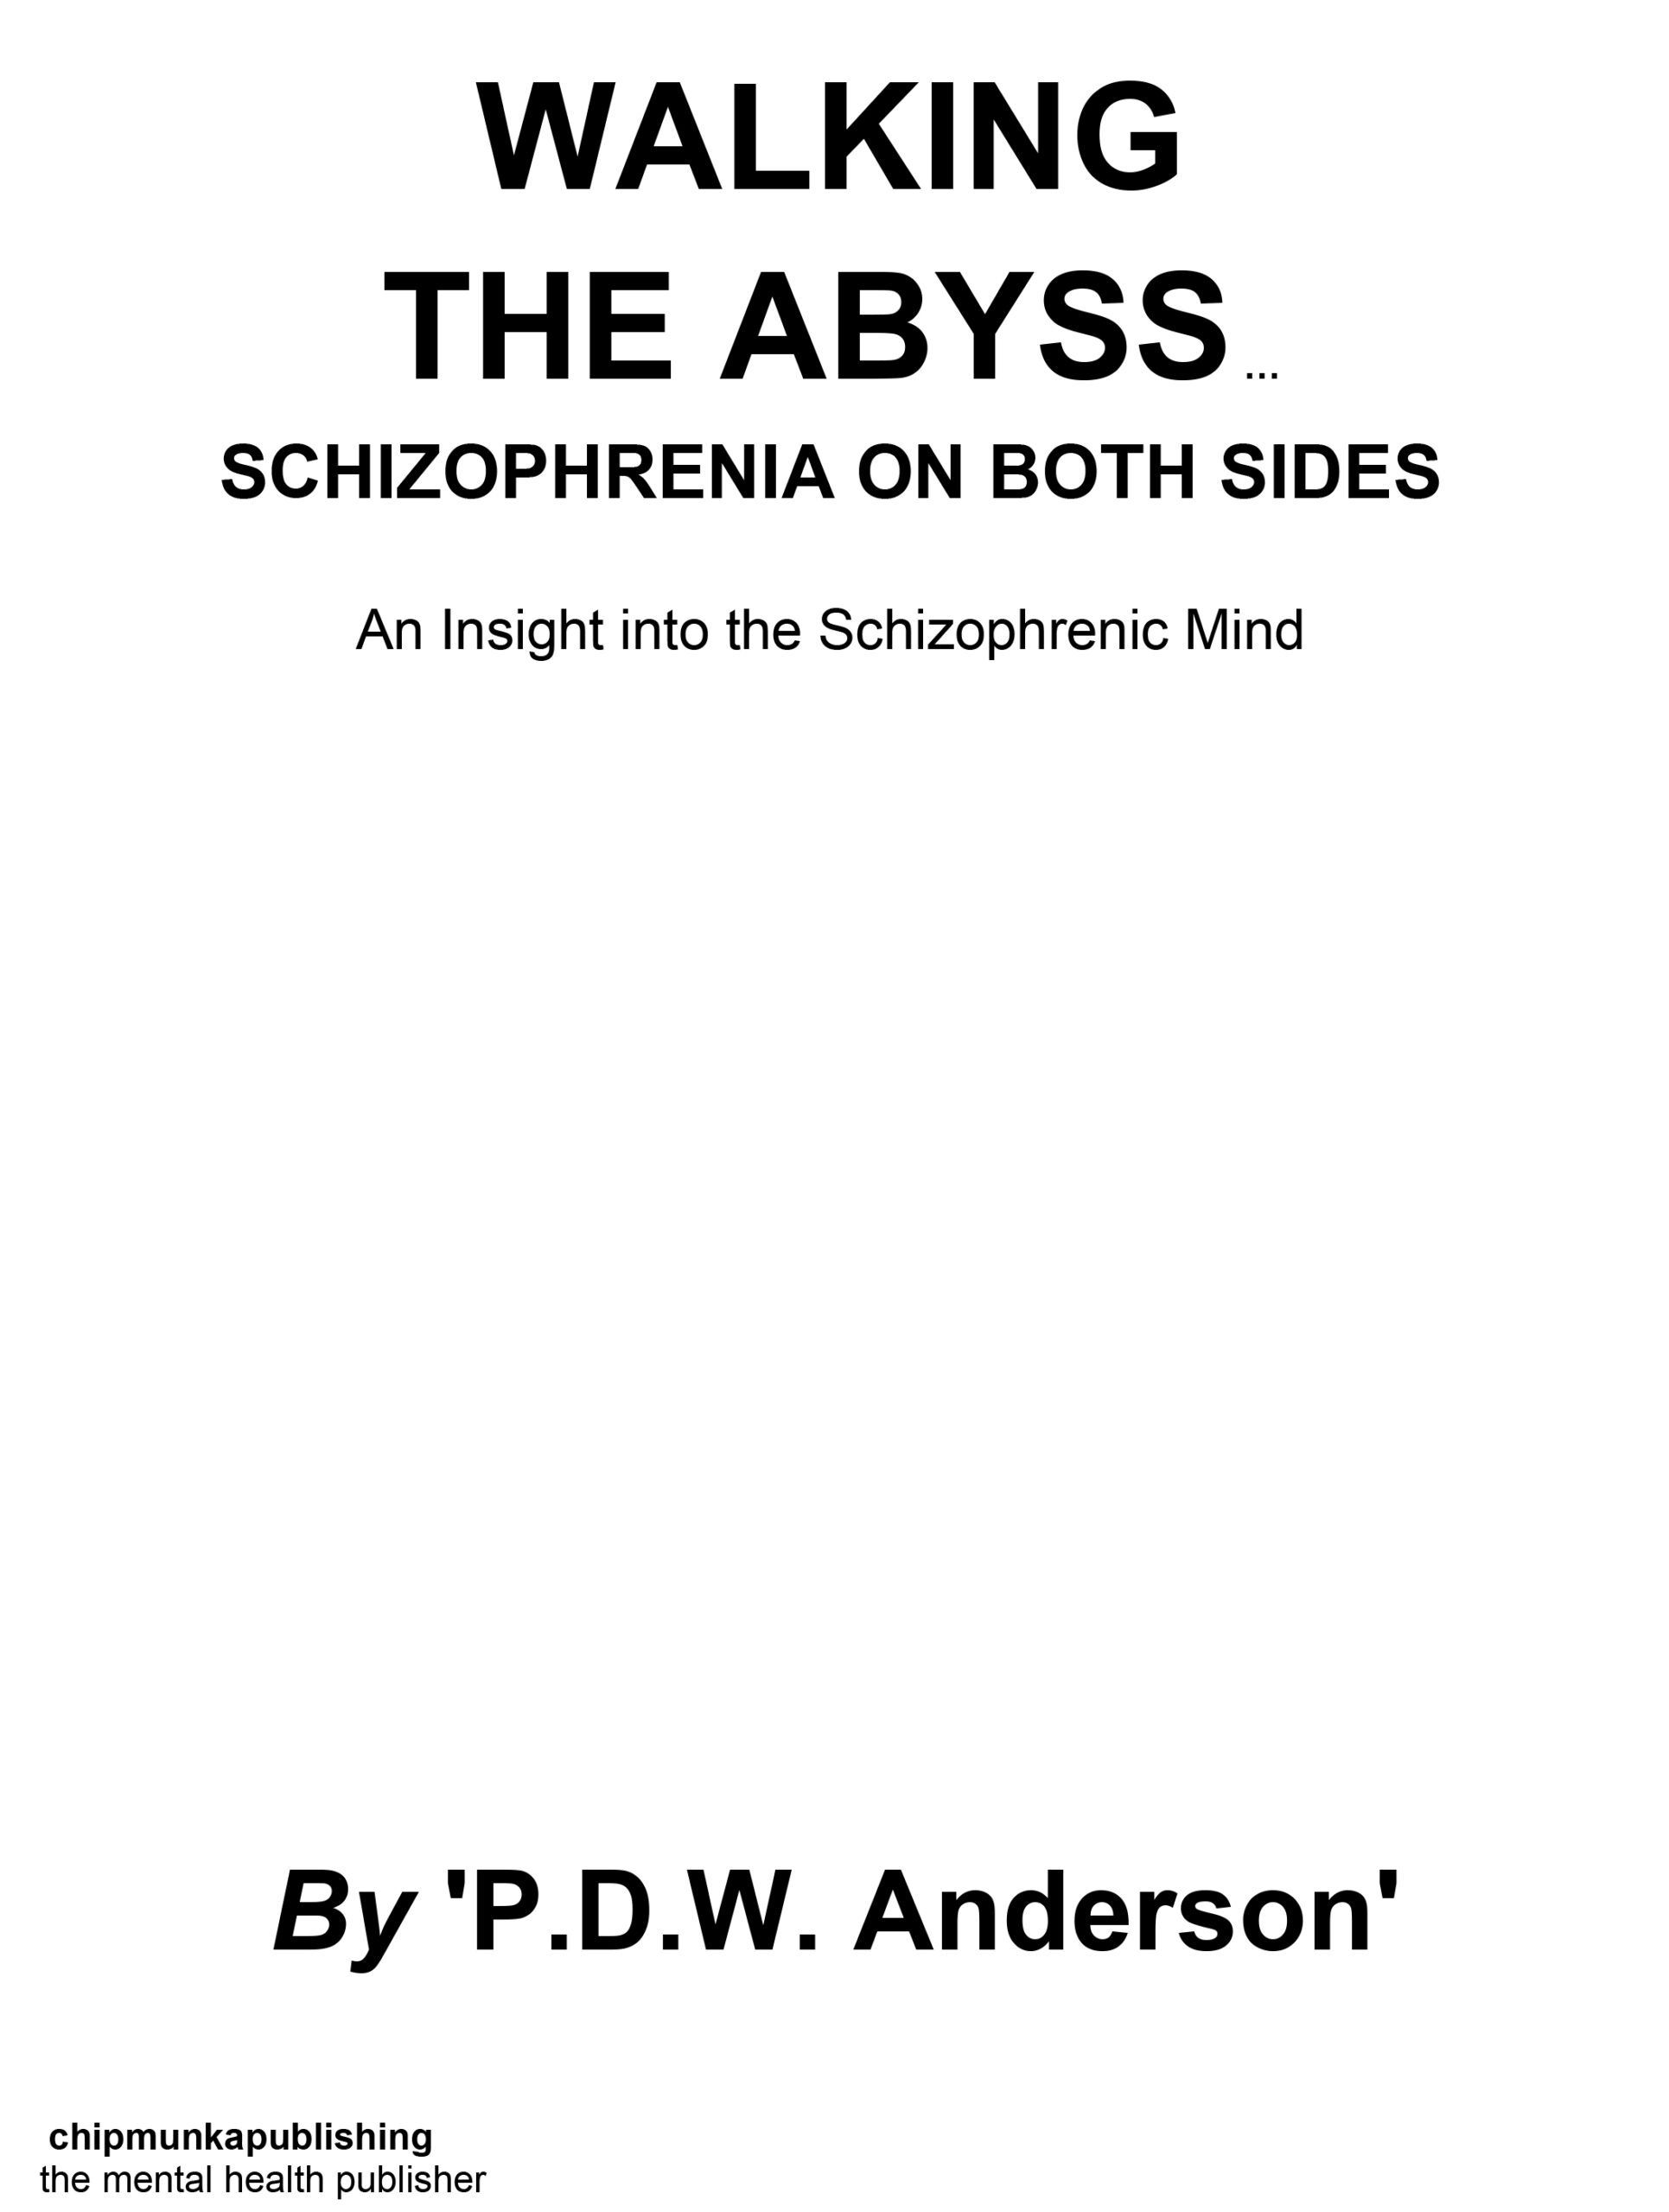 Walking The Abyss - Schizophrenia On Both Sides